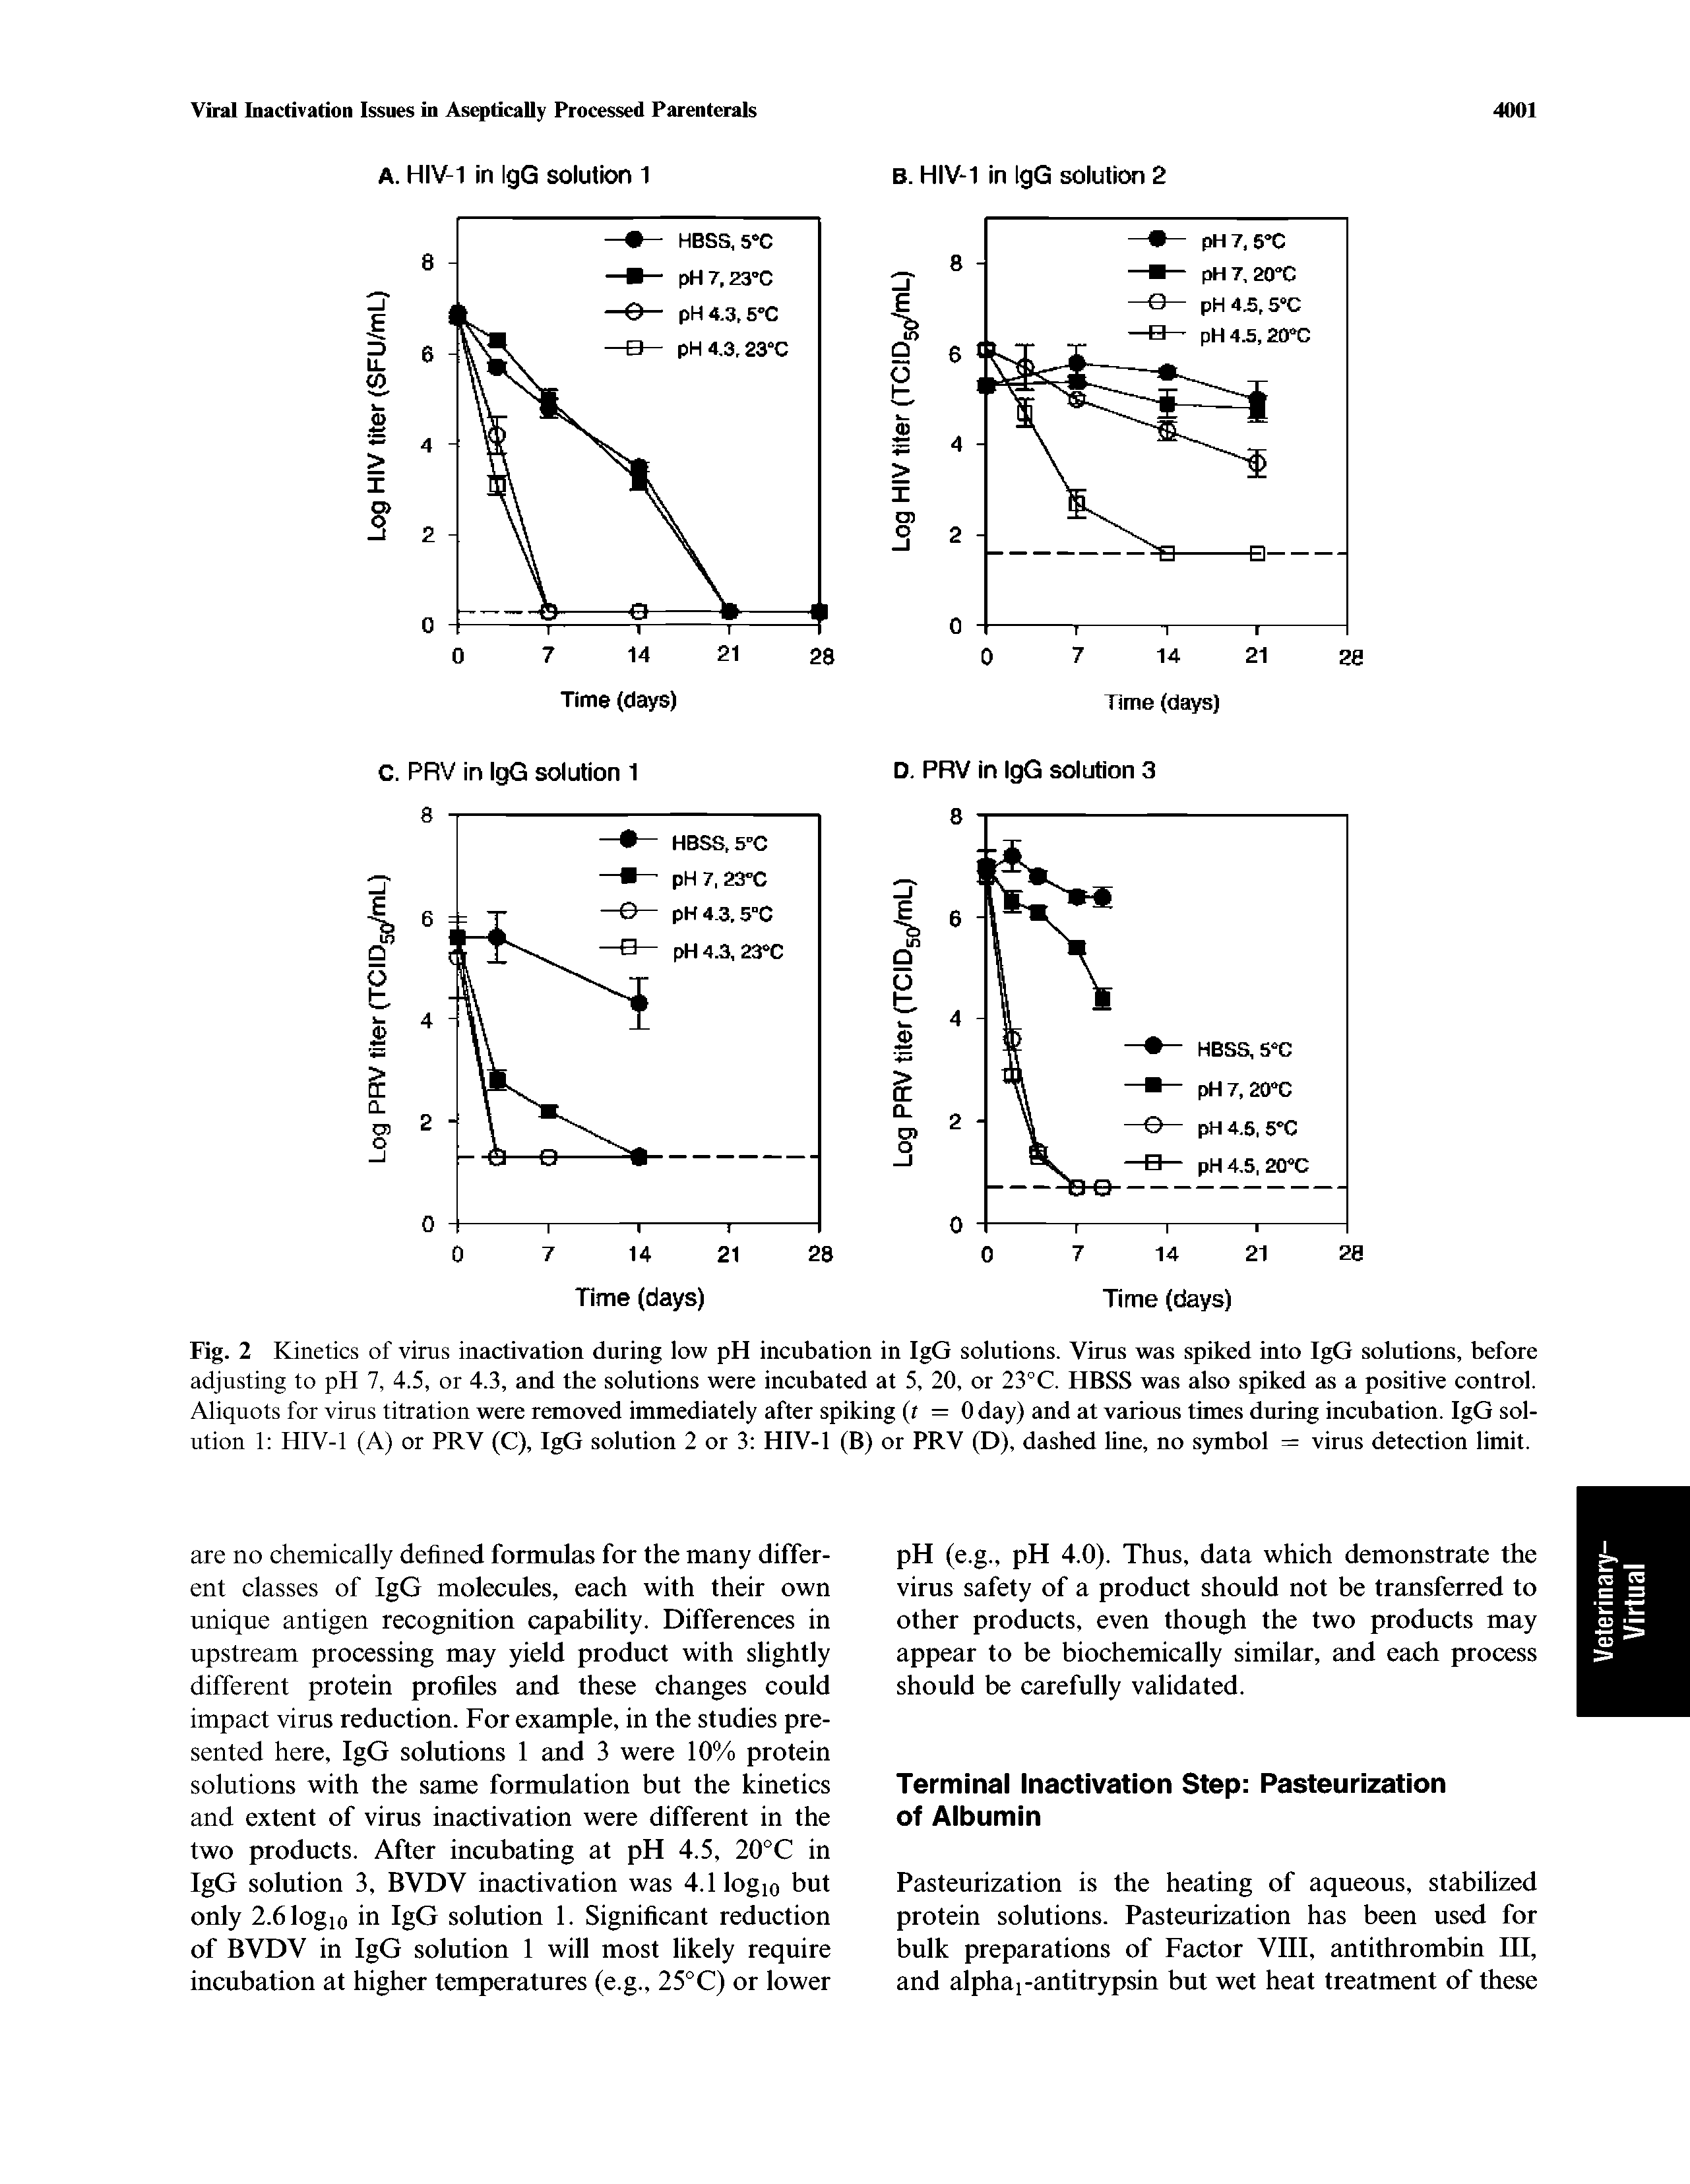 Fig. 2 Kinetics of vims inactivation during low pH incubation in IgG solutions. Vims was spiked into IgG solutions, before adjusting to pH 7, 4.5, or 4.3, and the solutions were incubated at 5, 20, or 23°C. HBSS was also spiked as a positive control. Aliquots for virus titration were removed immediately after spiking (r = 0 day) and at various times during incubation. IgG solution 1 HIV-1 (A) or PRV (C), IgG solution 2 or 3 HIV-1 (B) or PRV (D), dashed line, no symbol = virus detection limit.